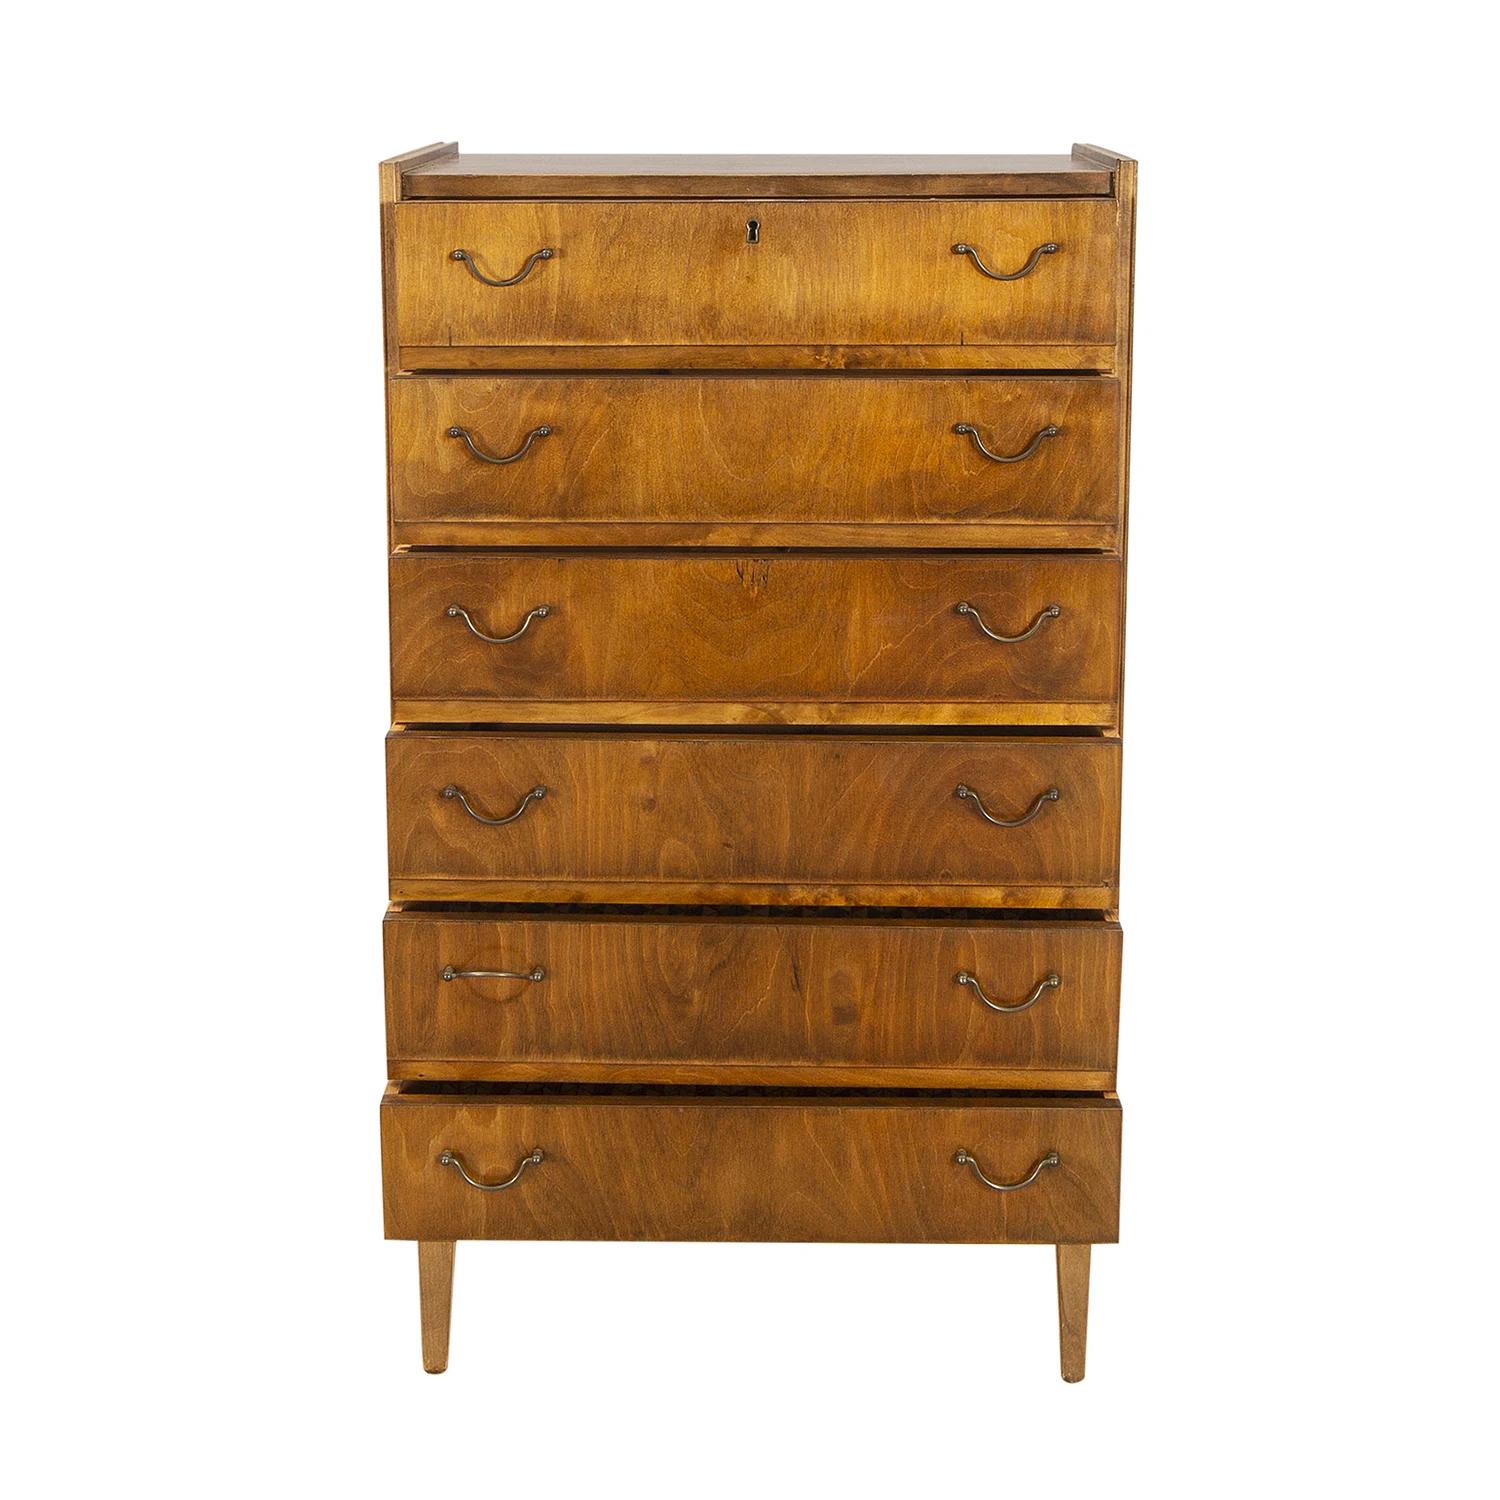 A vintage Swedish Art Deco bureau, semainier chest made of hand crafted polished, partly veneered Birchwood, in good condition. The Scandinavian cupboard is composed with six drawers and two handles, pulls consisting its original chrome hardware and